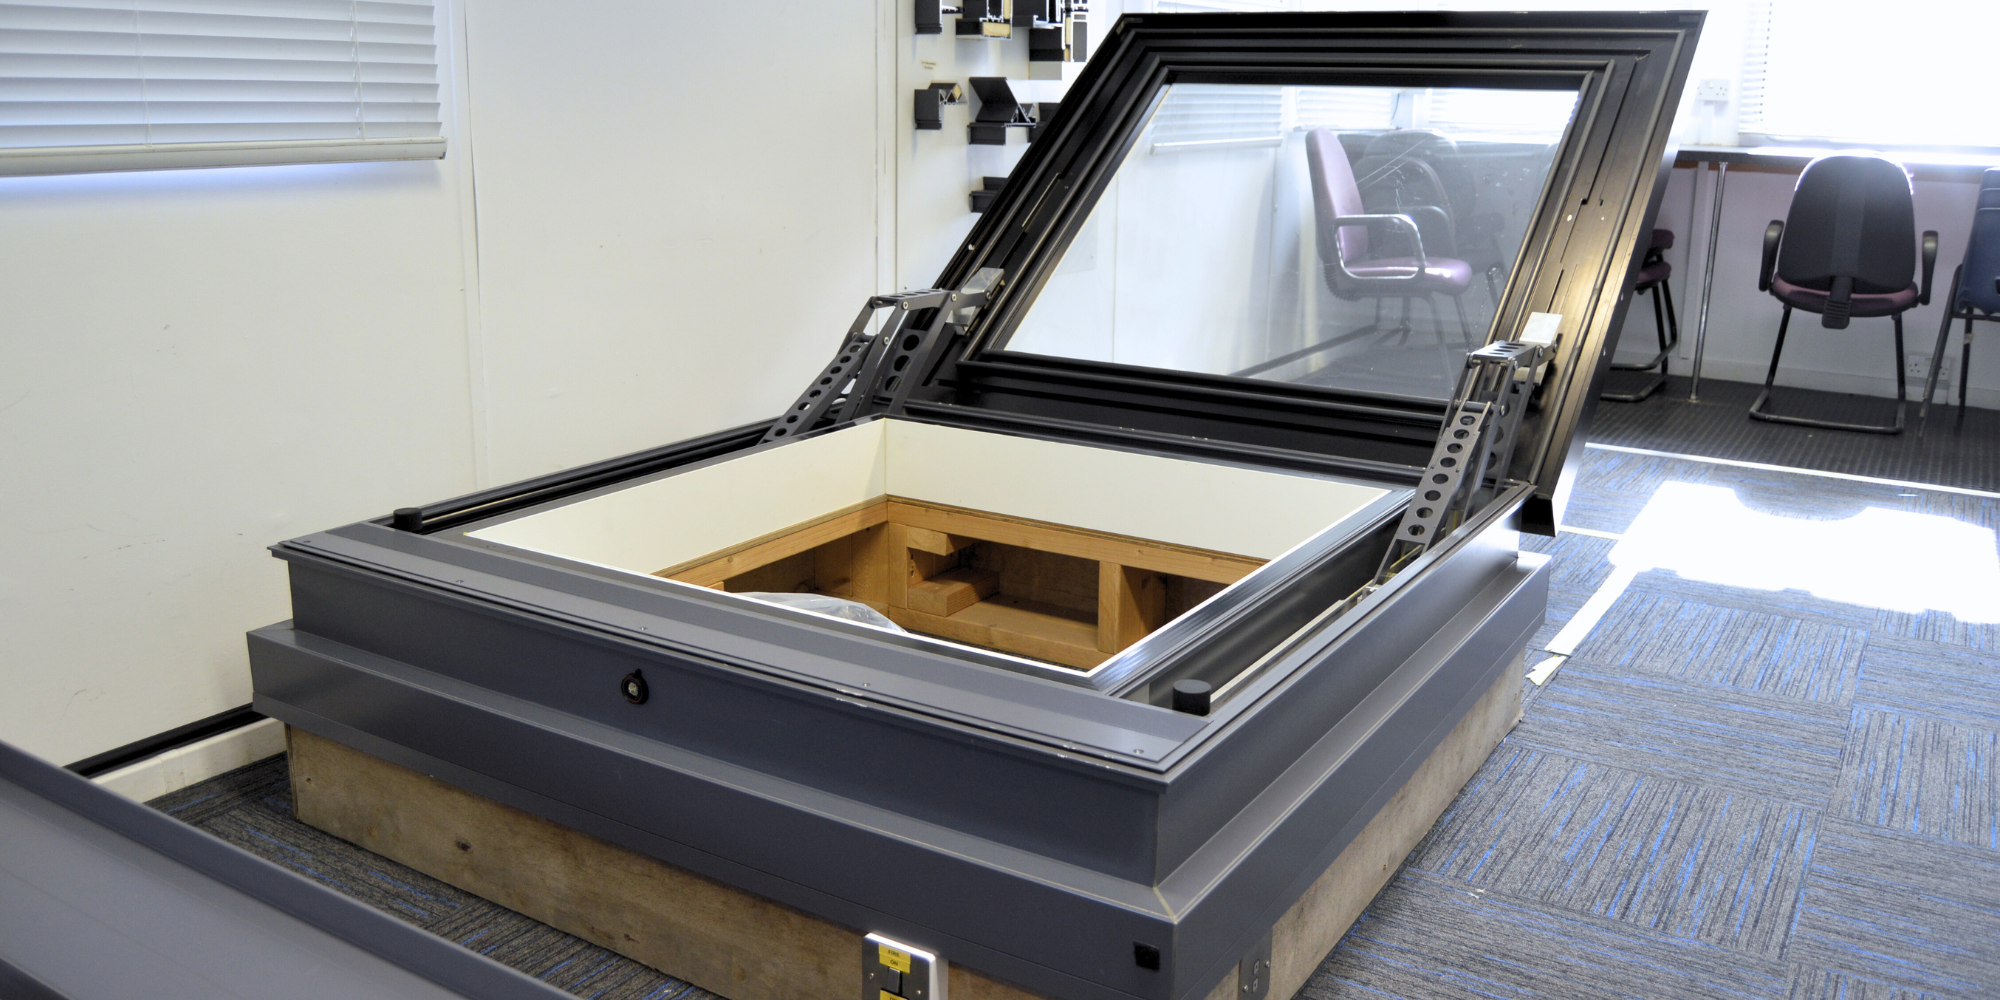 The UK’s First Rooflight To Be Electronically Recoverable!